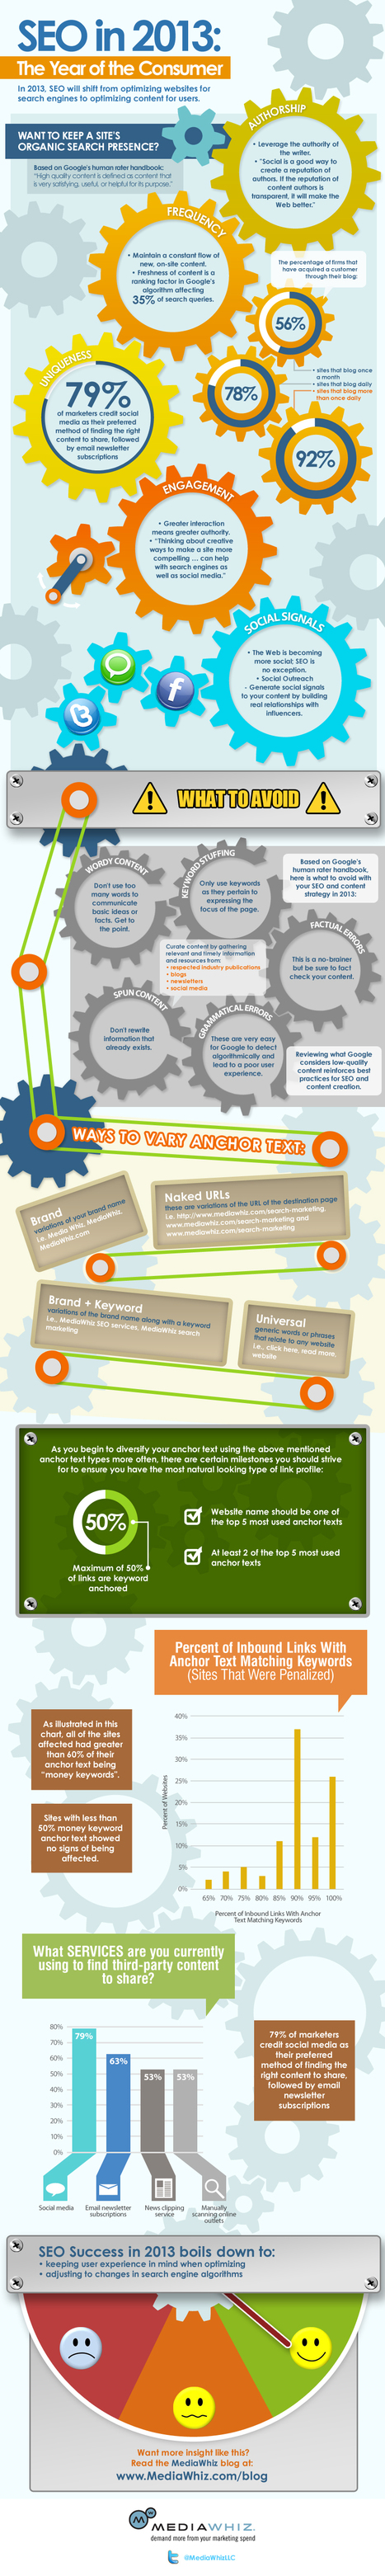 #SEO in 2013 : The year of the consumer | Seo, Social Media Marketing | Scoop.it